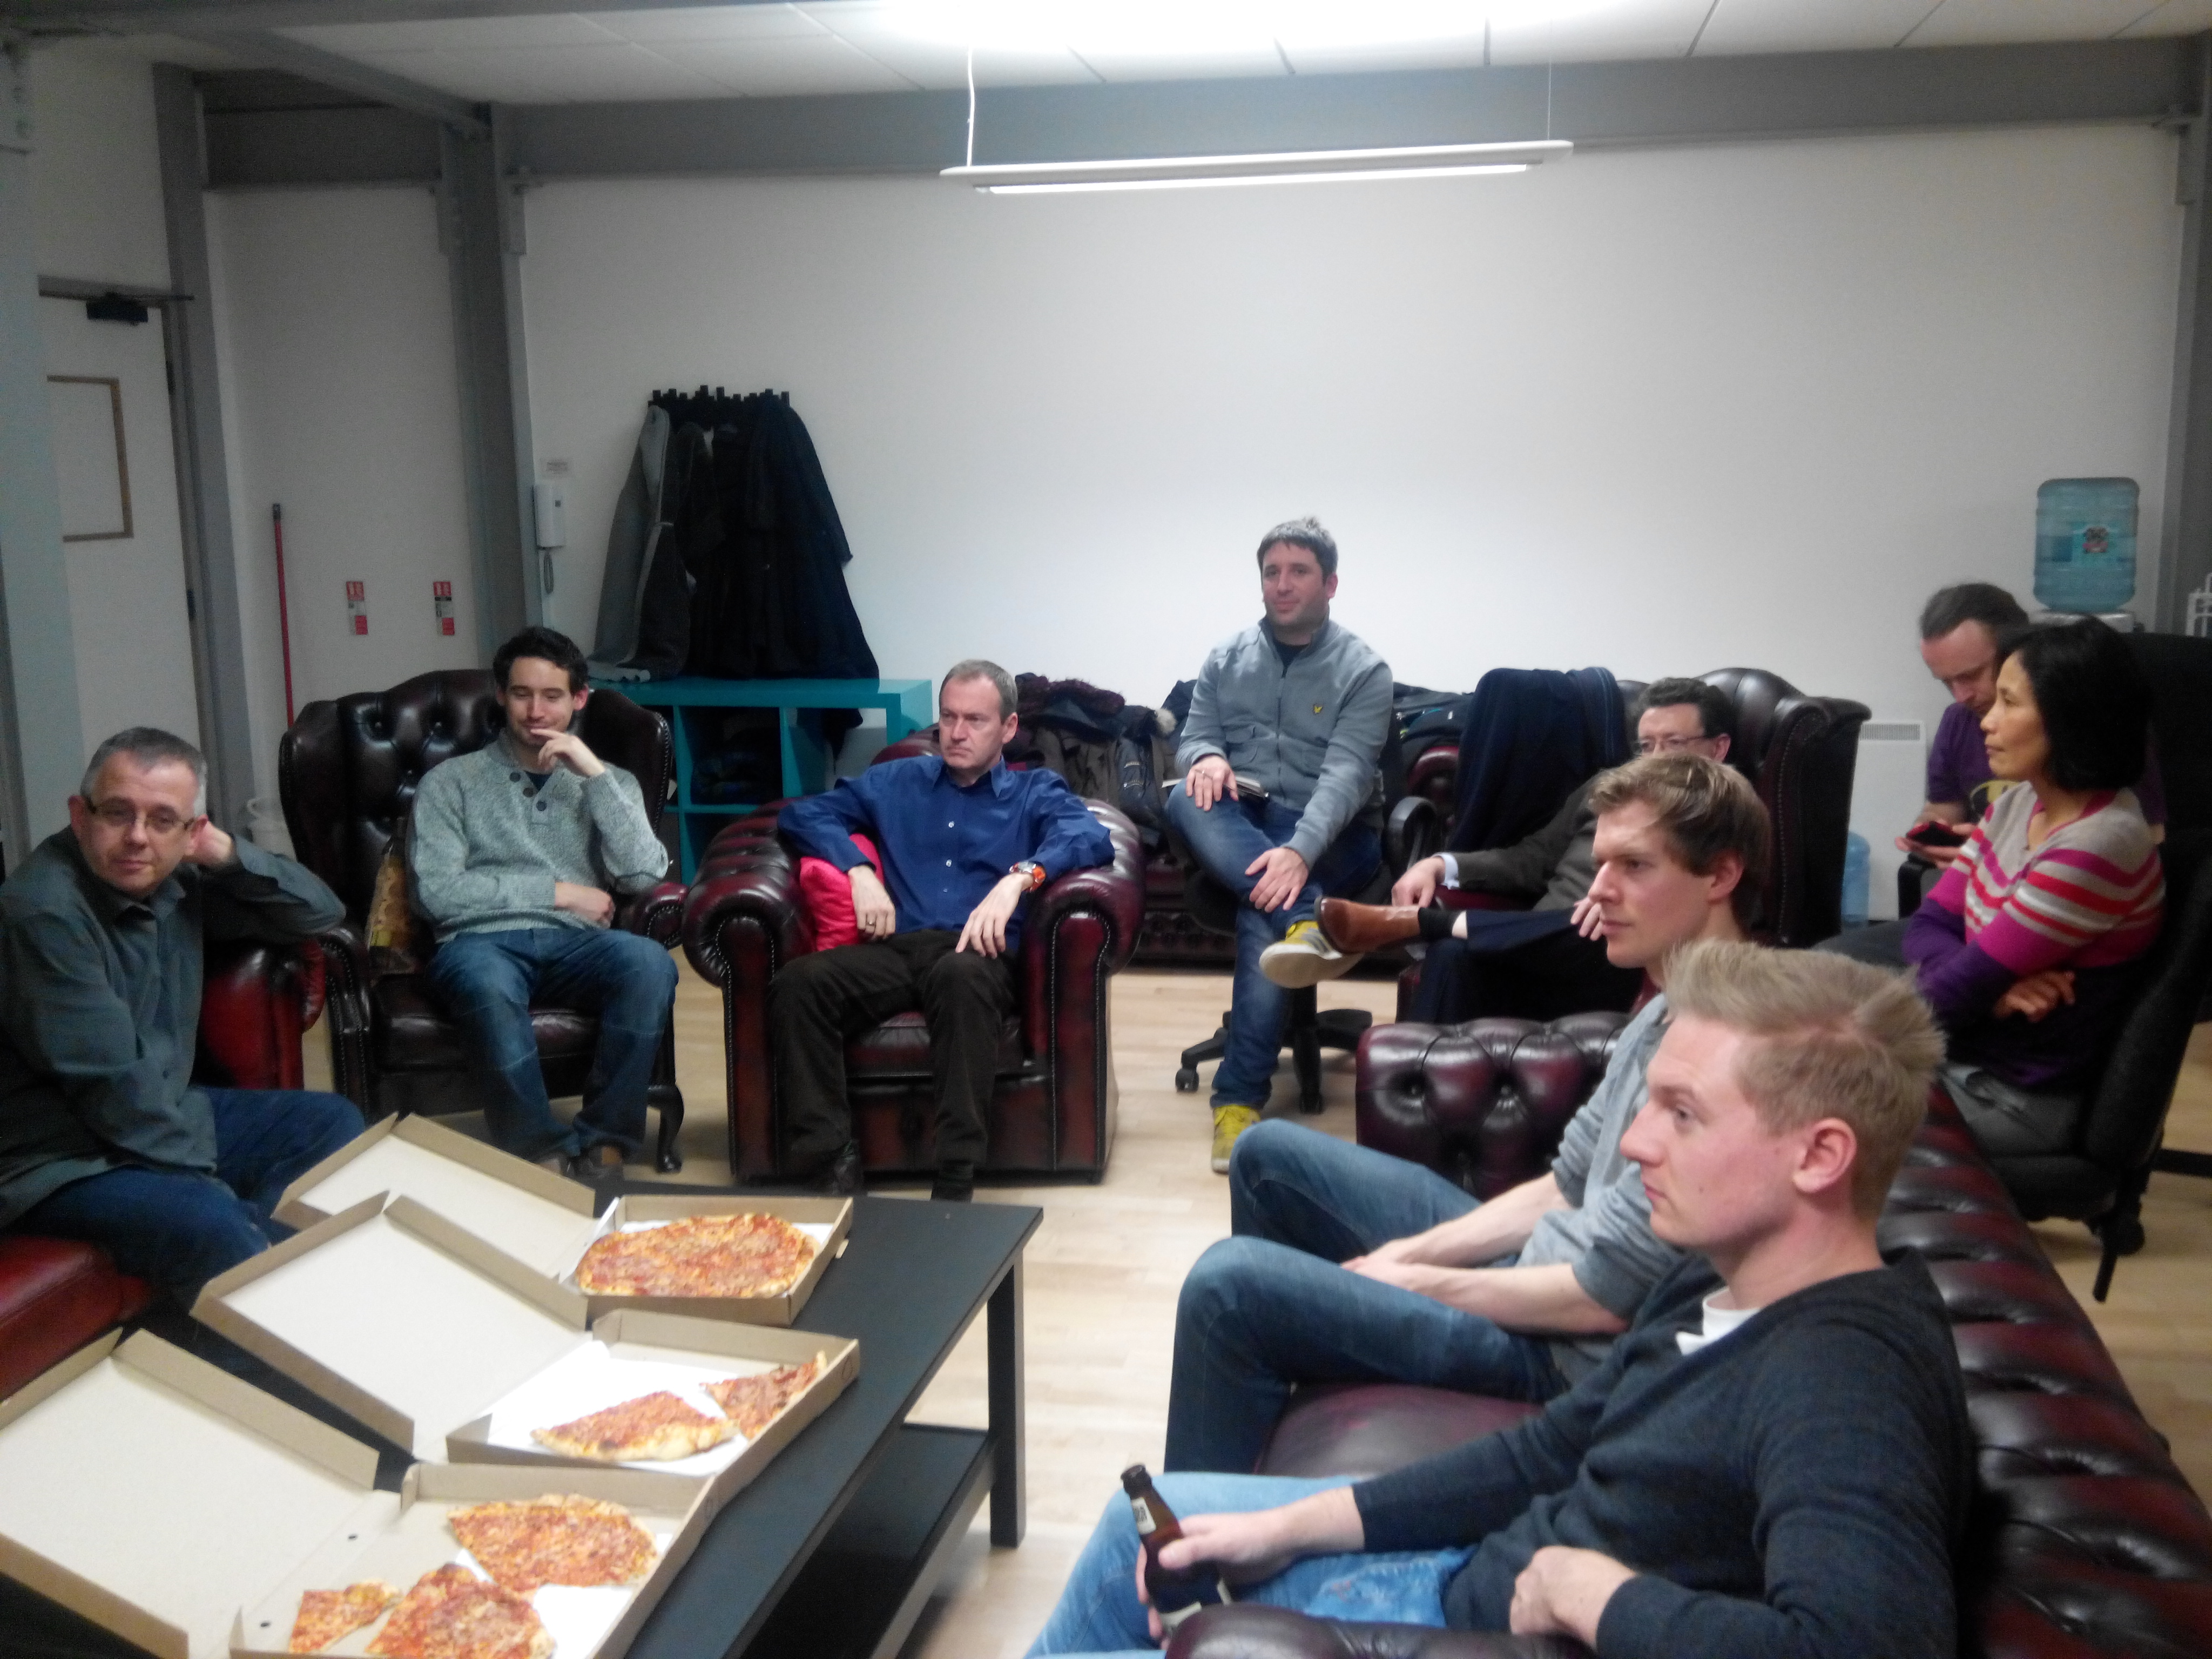 Free pizza and beer that the Curve Agency office